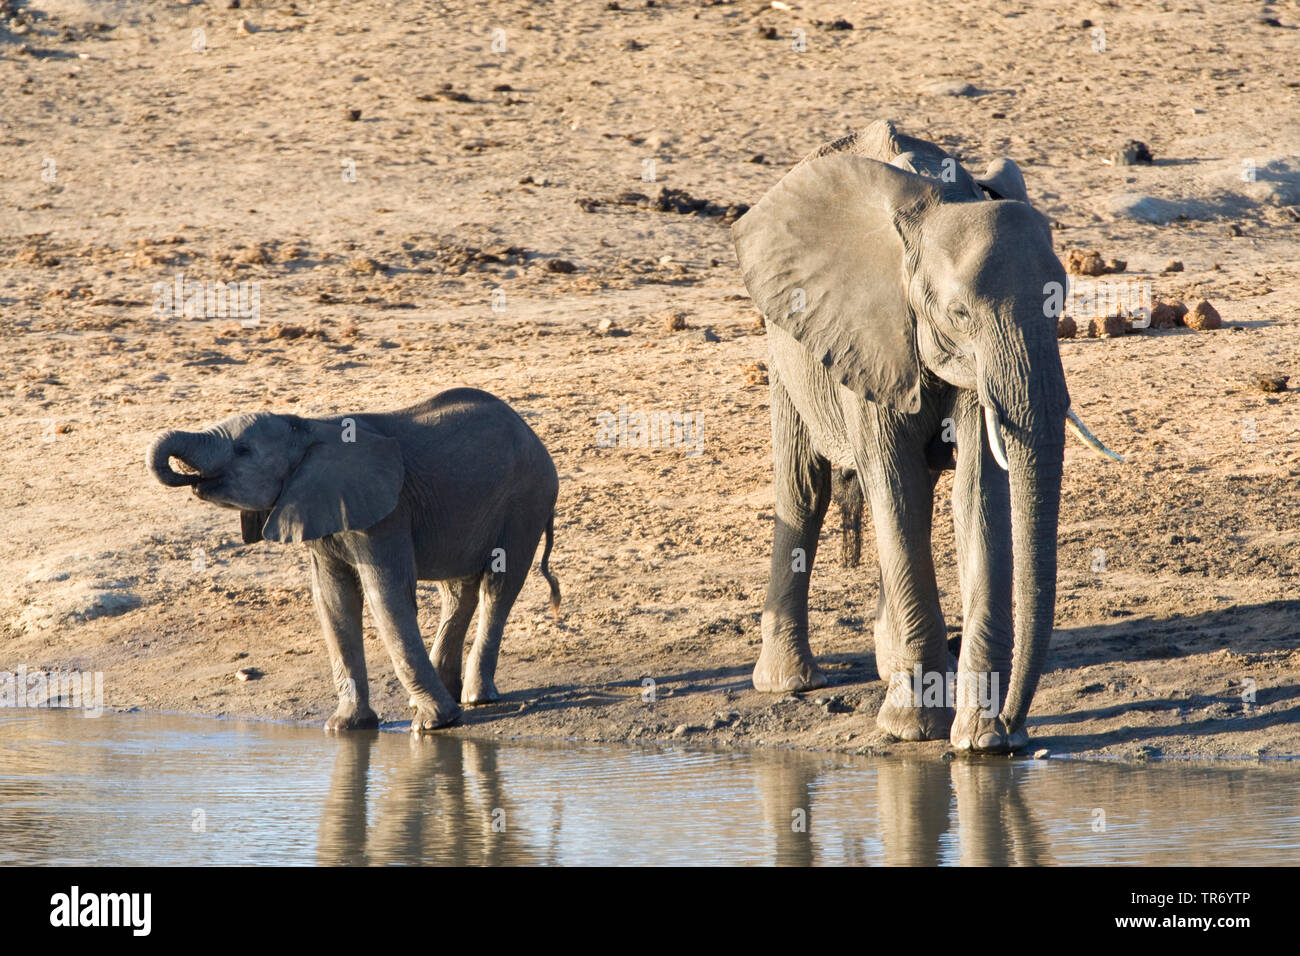 African elephant (Loxodonta africana), cow and calf drinking at a water hole, South Africa, Krueger National Park Stock Photo